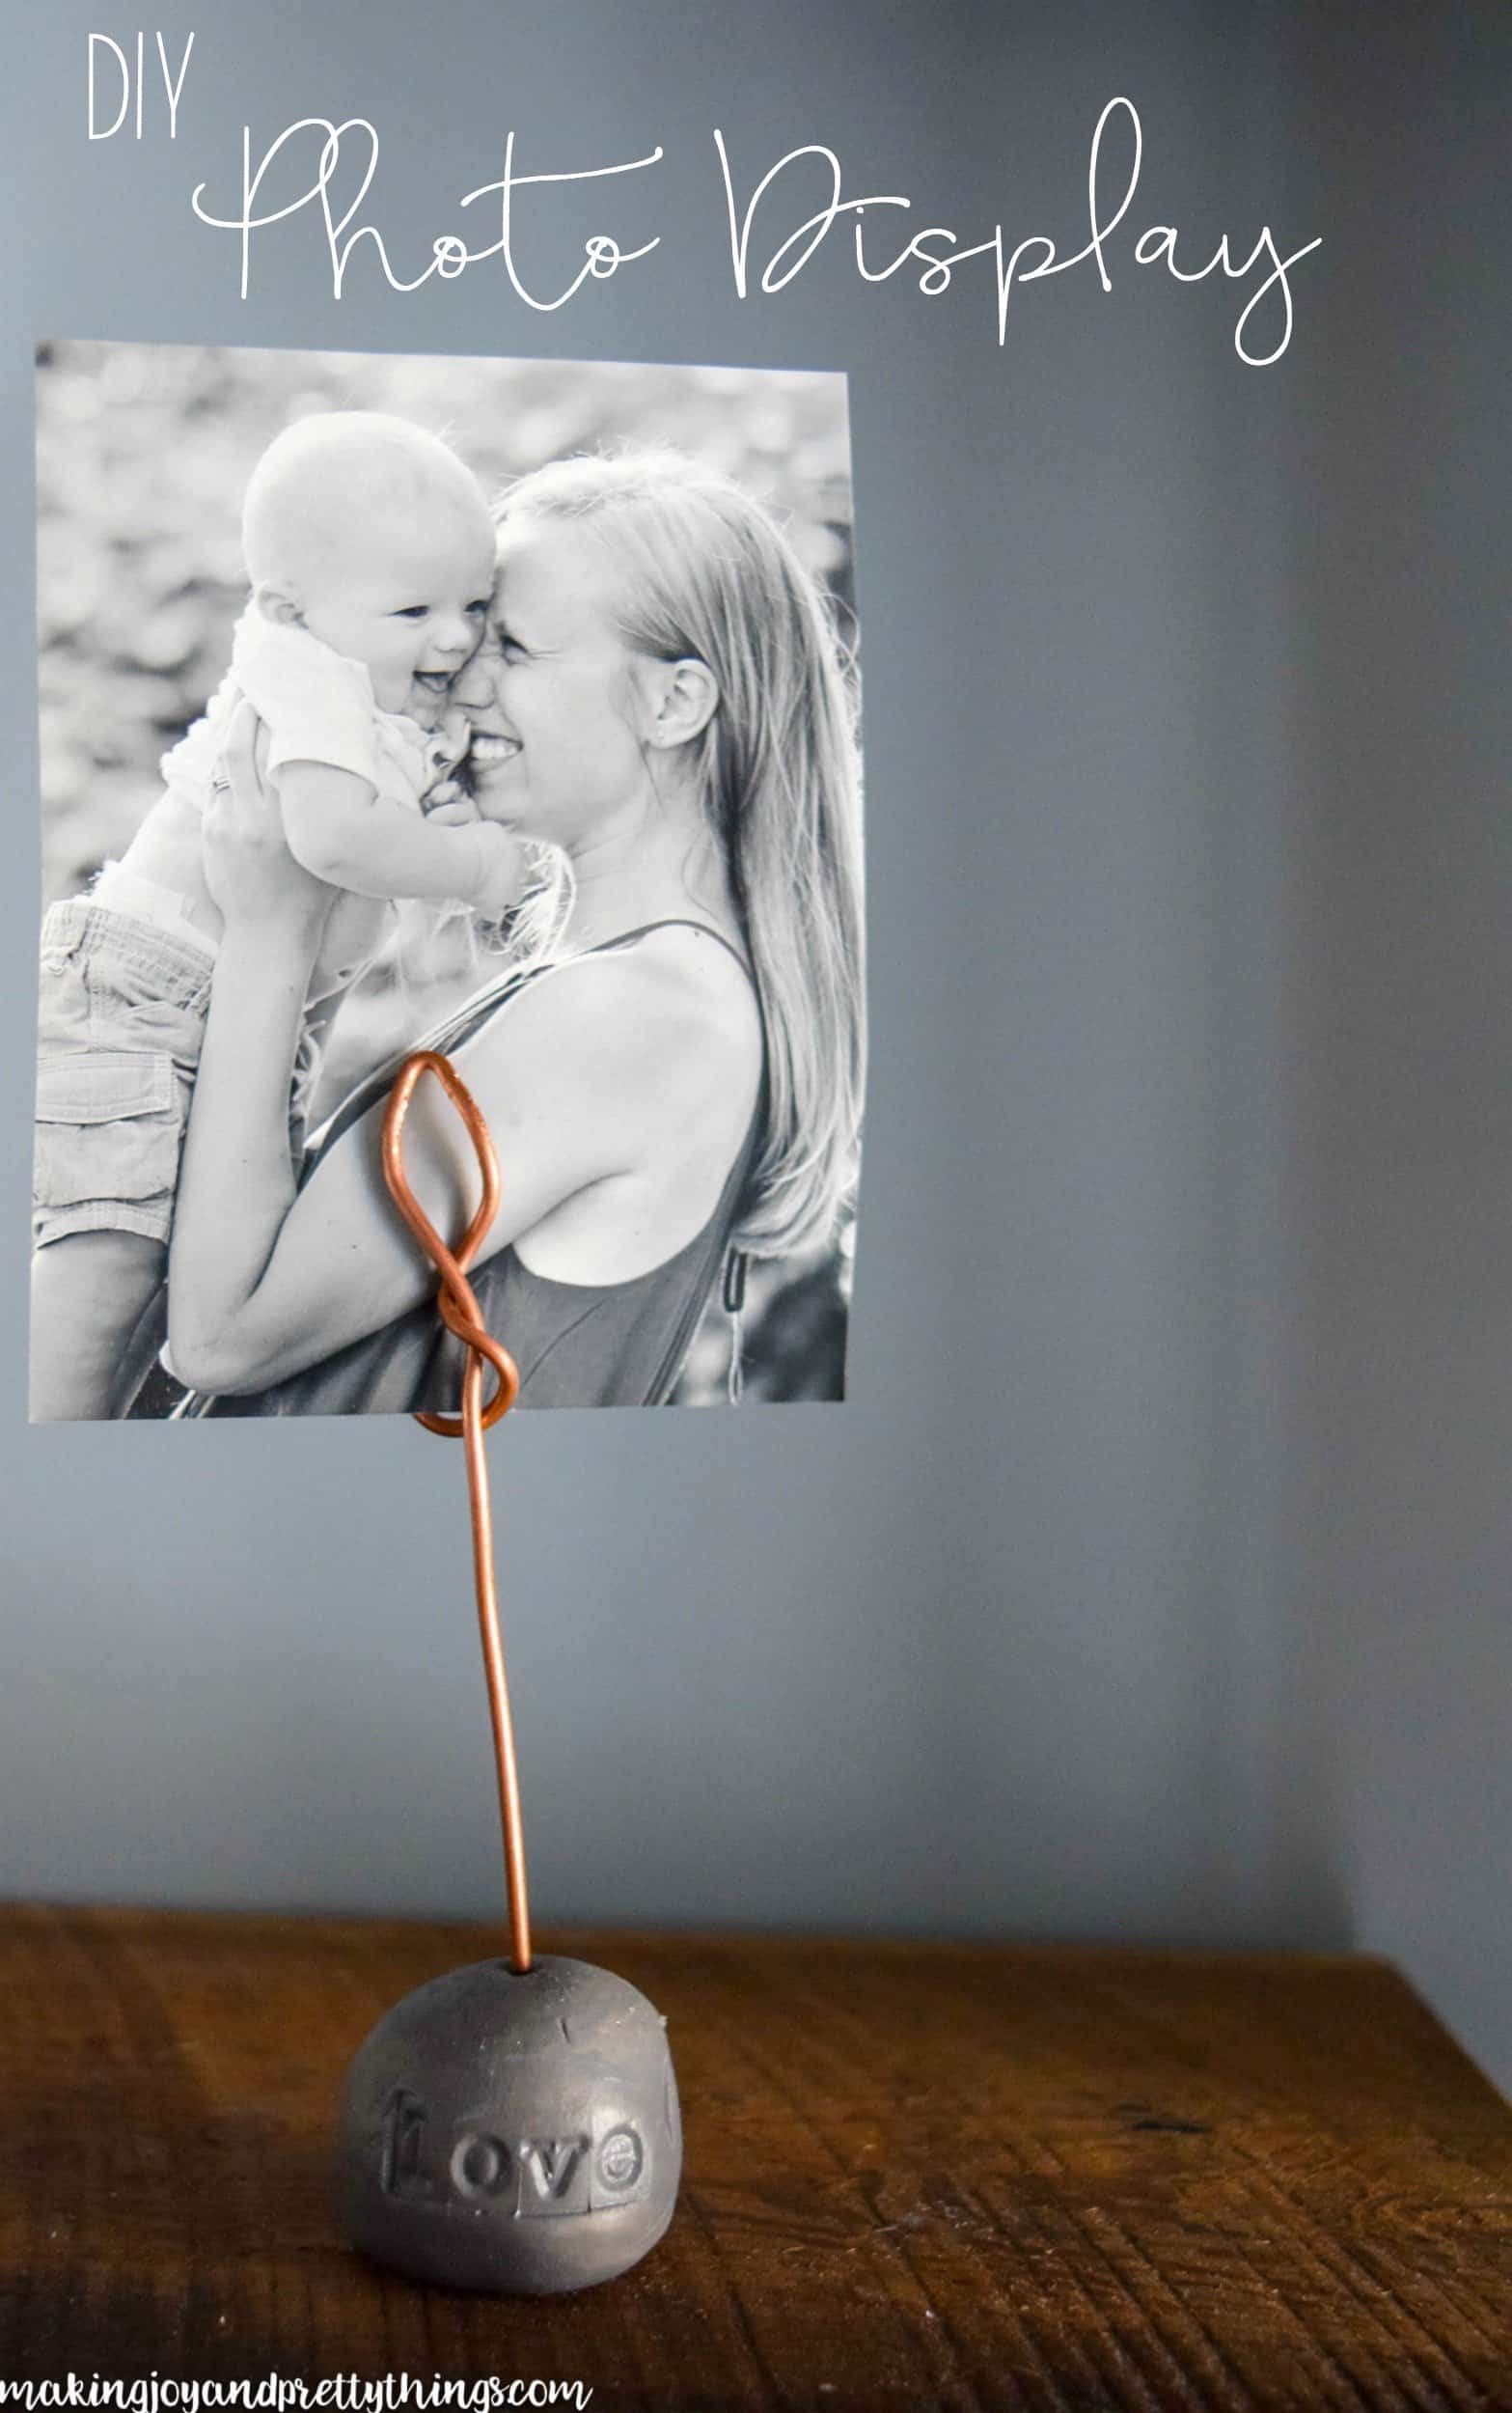 DIY Farmhouse Photo Display using Copper Wire and Clay is a simple and creative way to look at your pictures